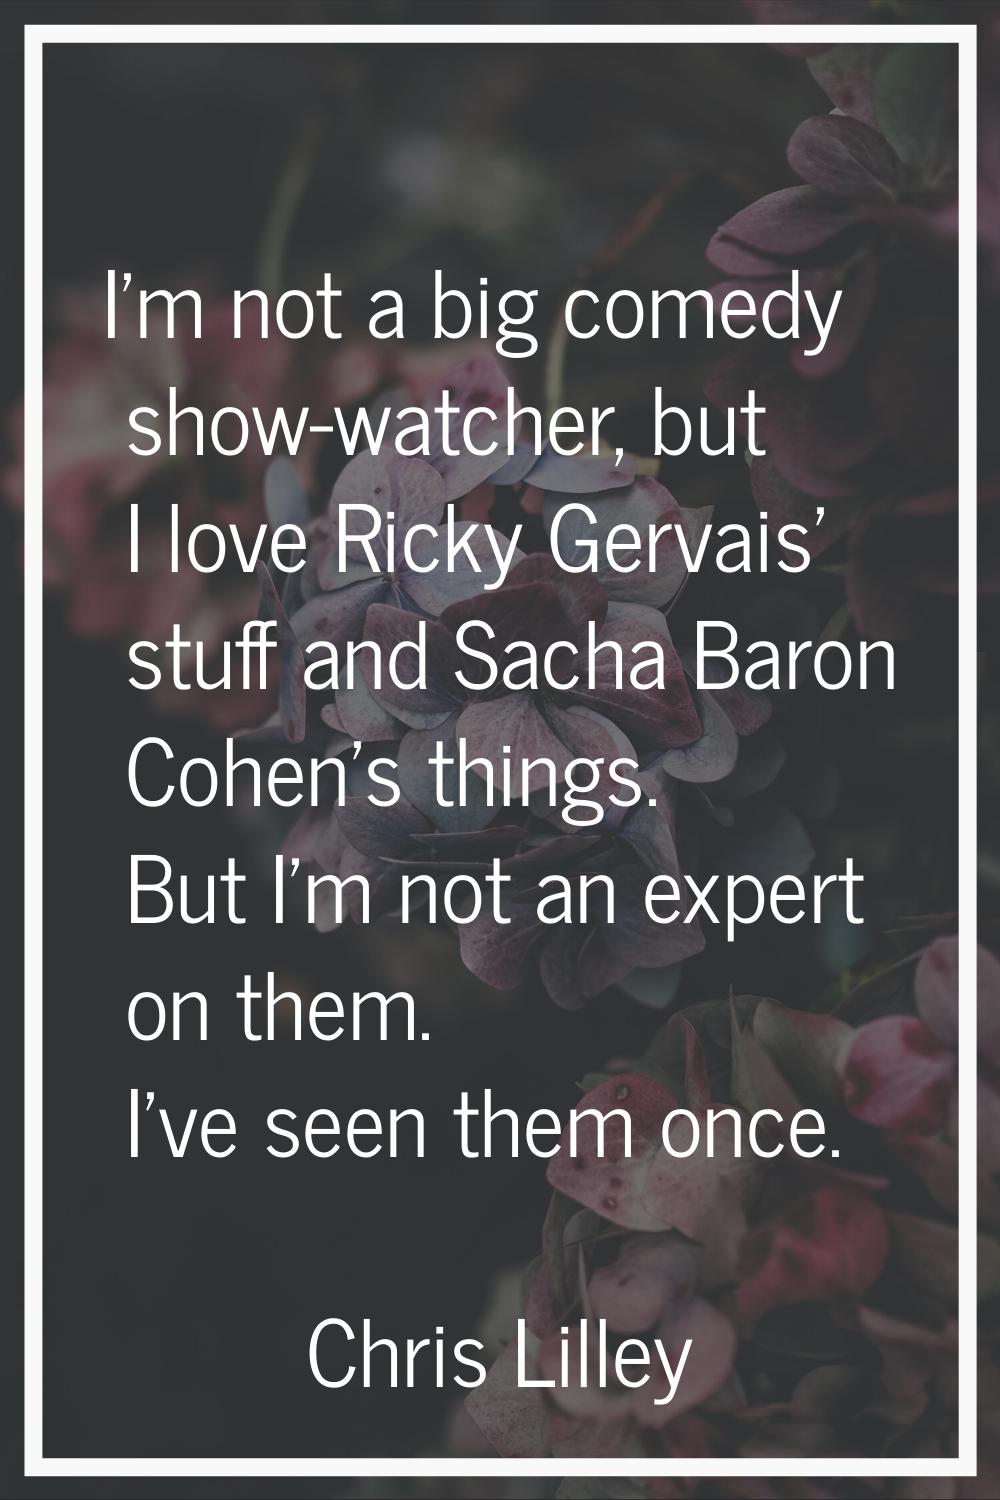 I'm not a big comedy show-watcher, but I love Ricky Gervais' stuff and Sacha Baron Cohen's things. 